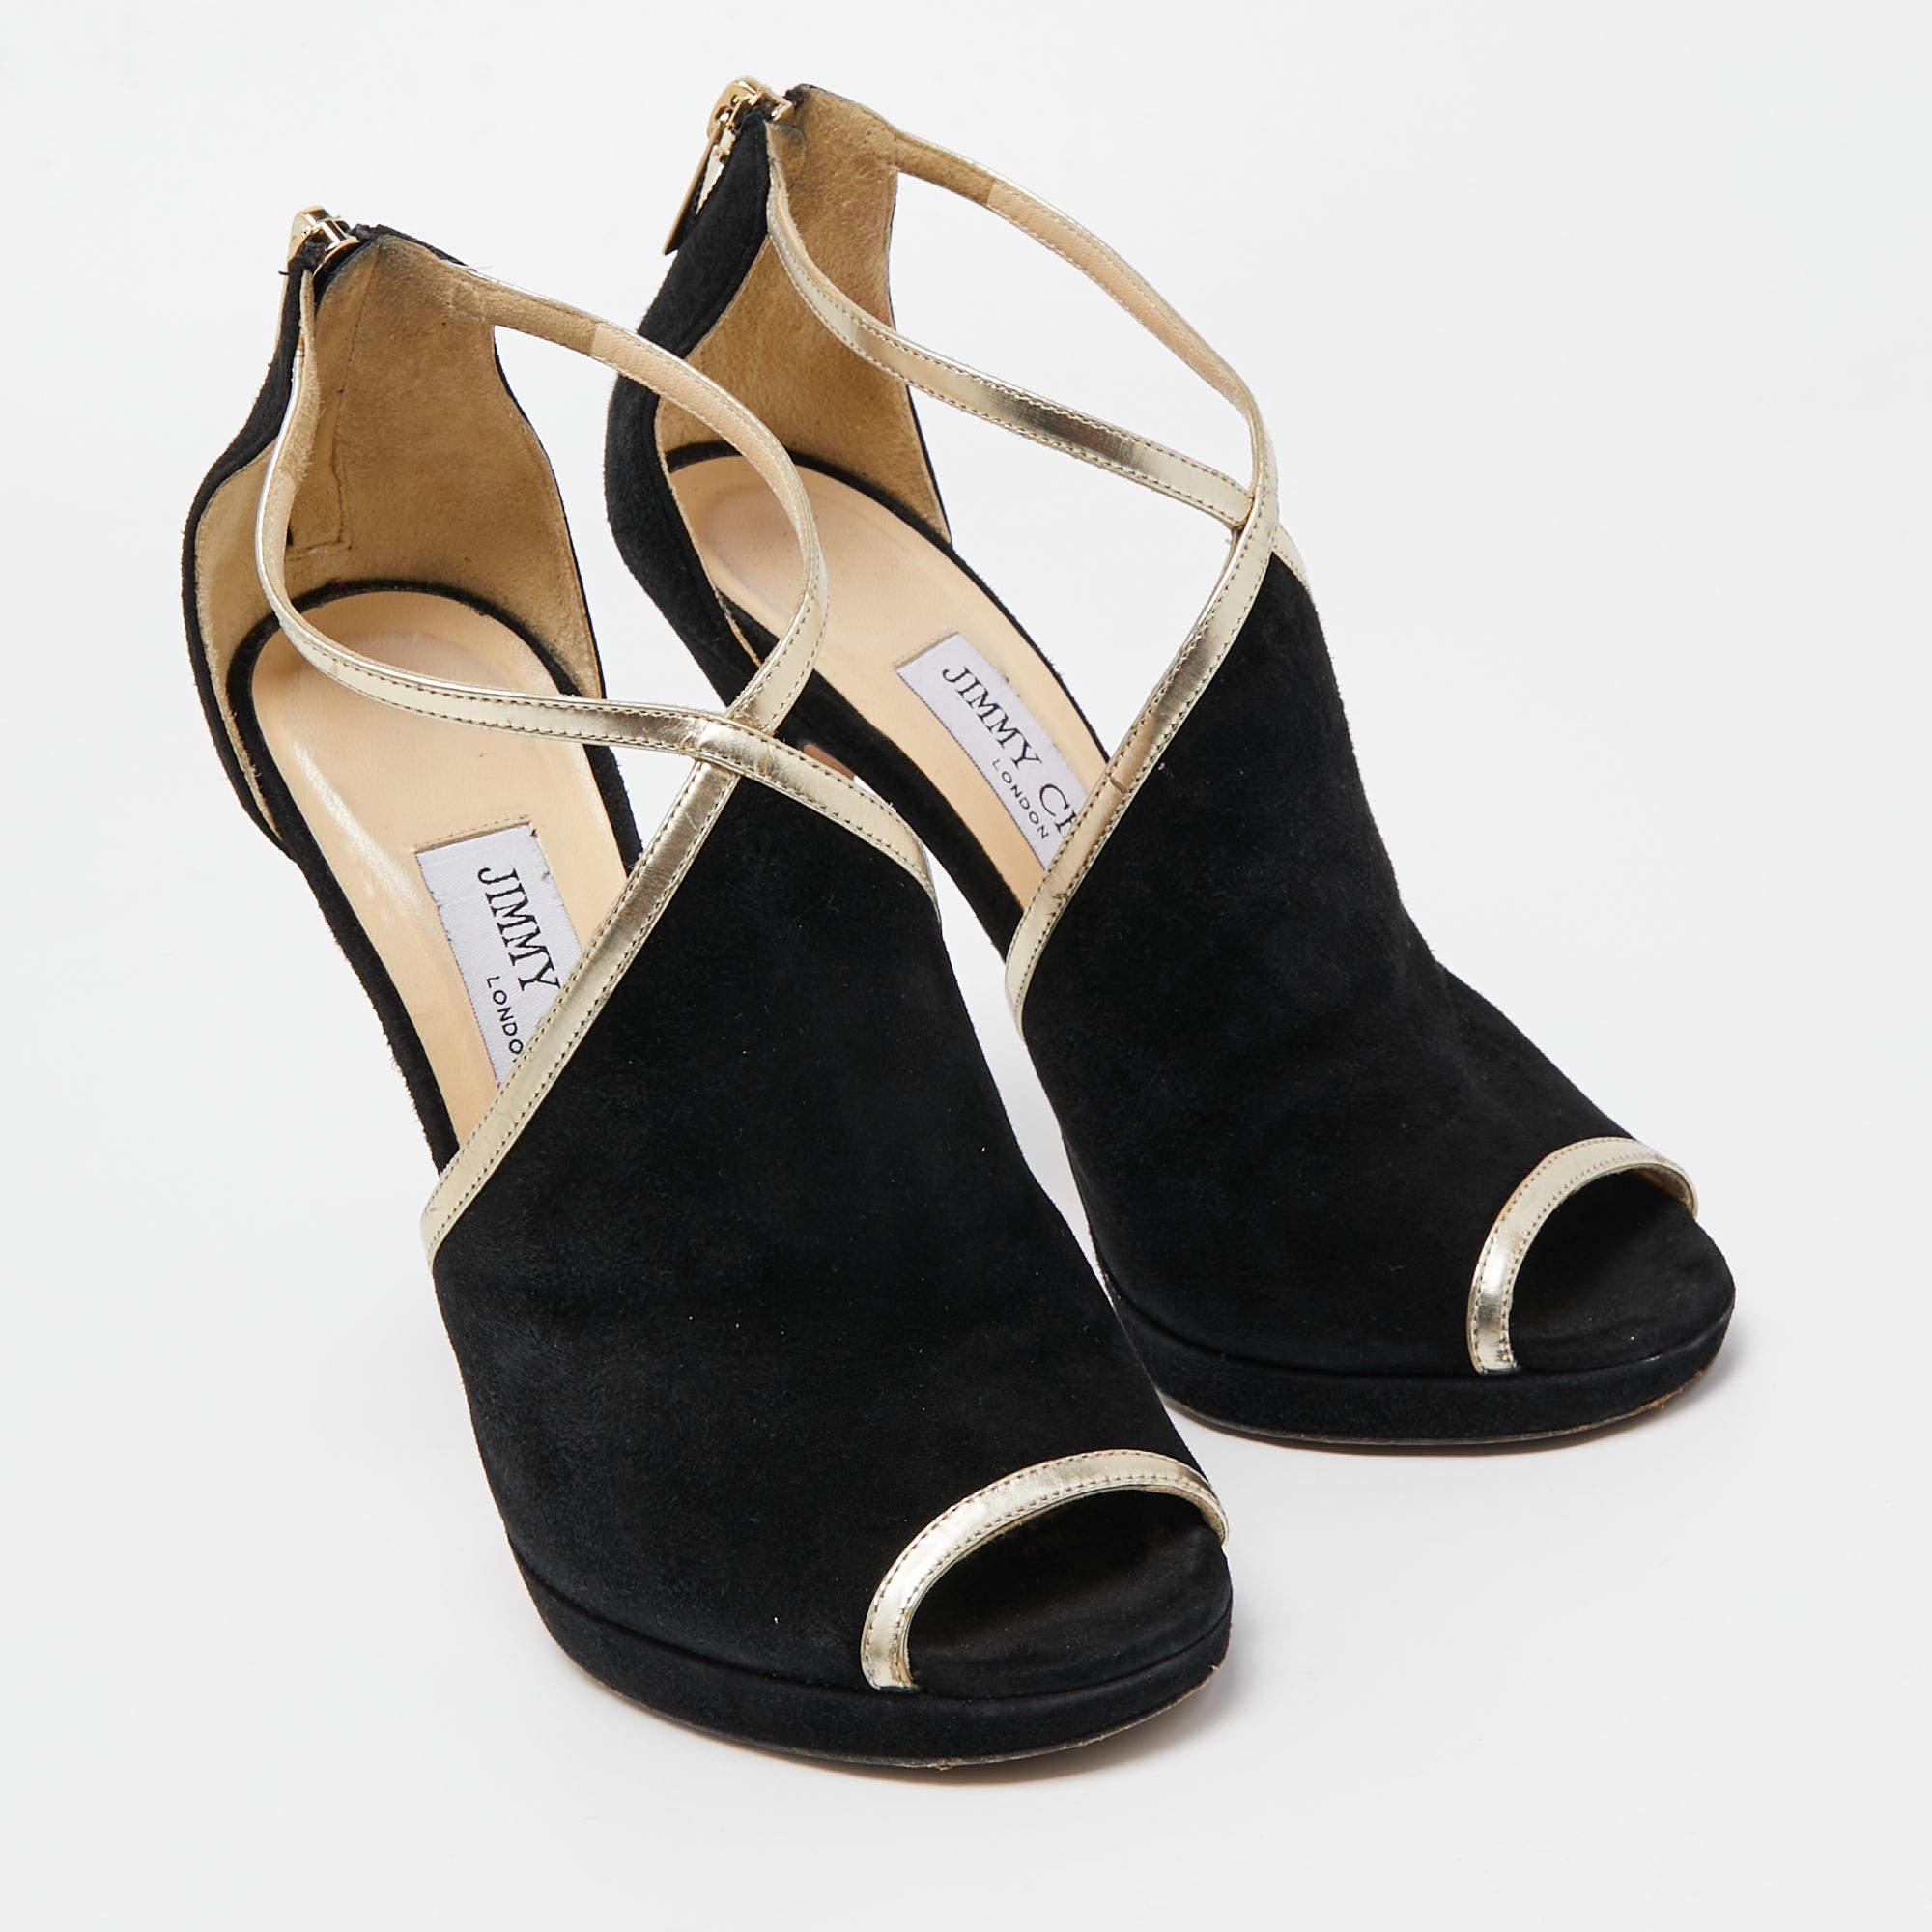 Jimmy Choo Black Suede and Leather Fey Ankle Strap Sandals Size 36 In Good Condition For Sale In Dubai, Al Qouz 2